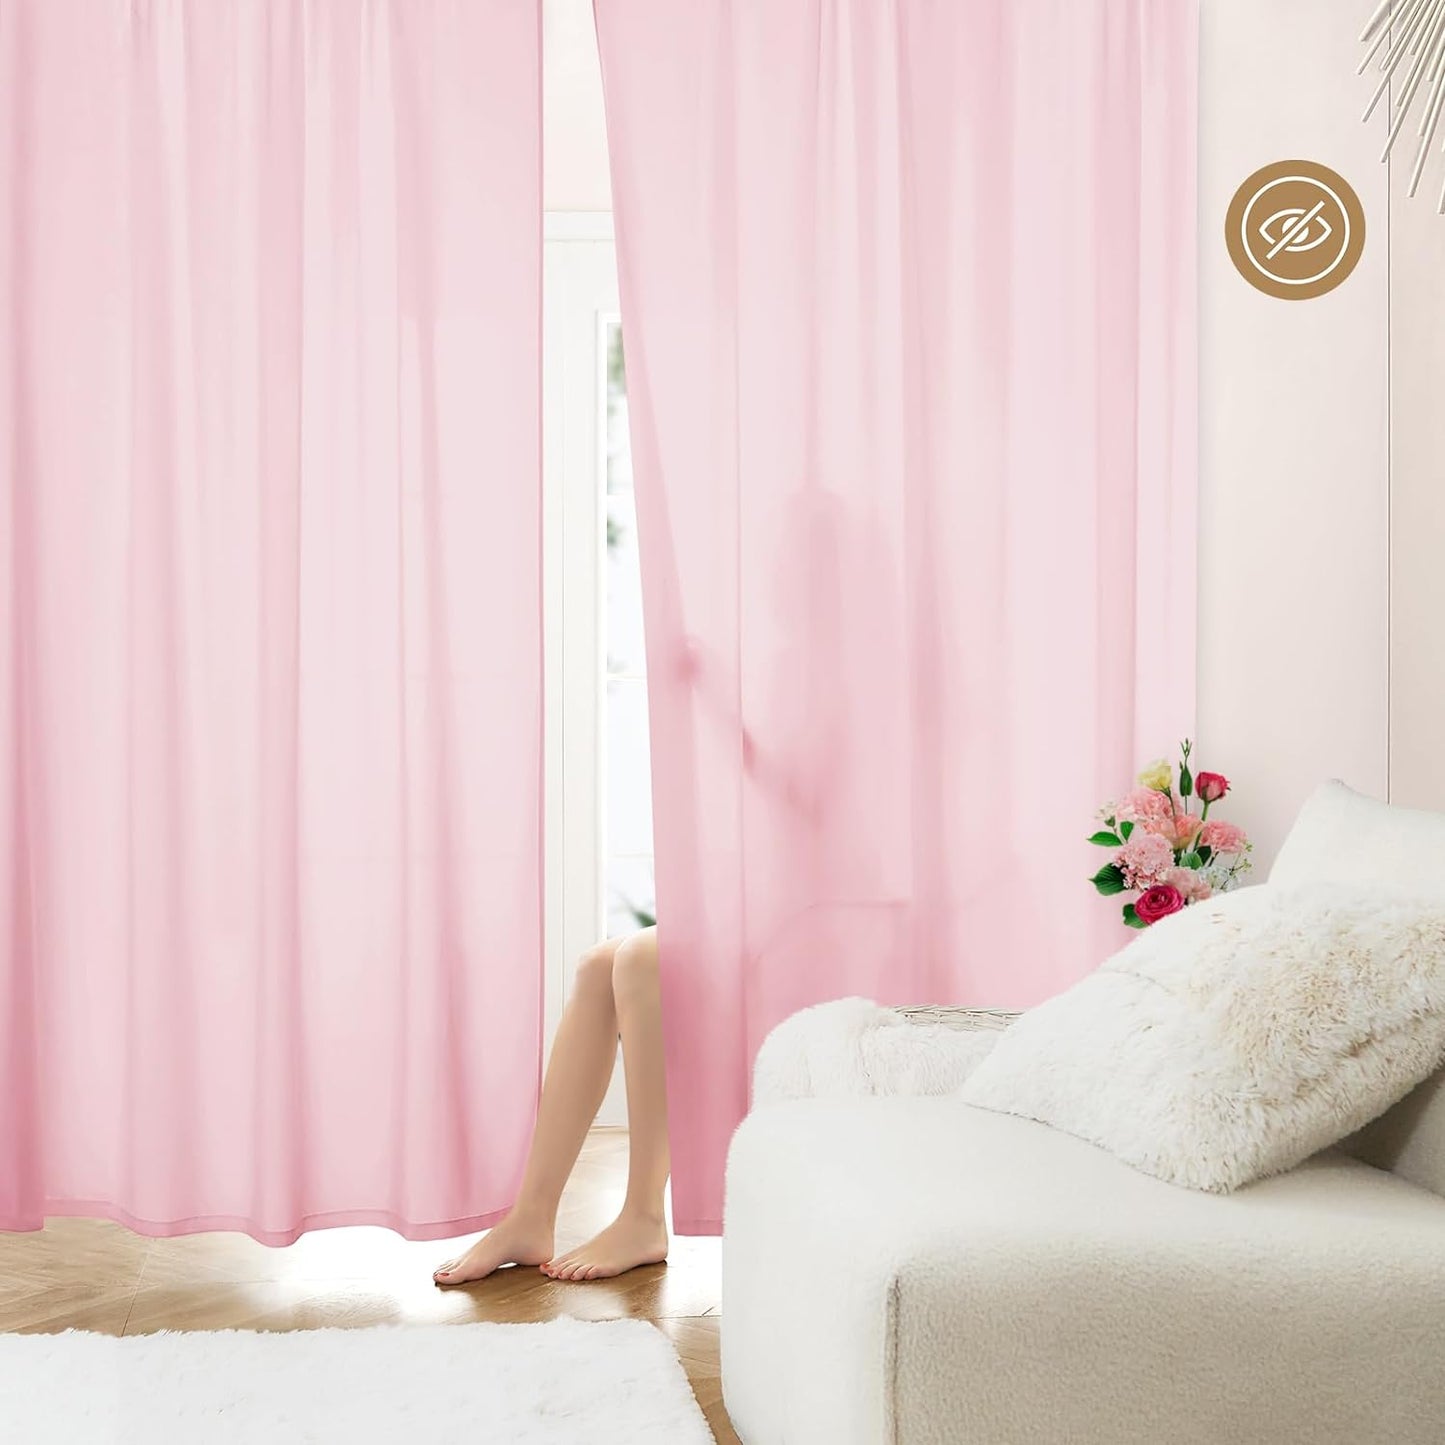 HOMEIDEAS Non-See-Through White Privacy Sheer Curtains 52 X 84 Inches Long 2 Panels Semi Sheer Curtains Light Filtering Window Curtains Drapes for Bedroom Living Room  HOMEIDEAS Light Pink W52" X L45" 